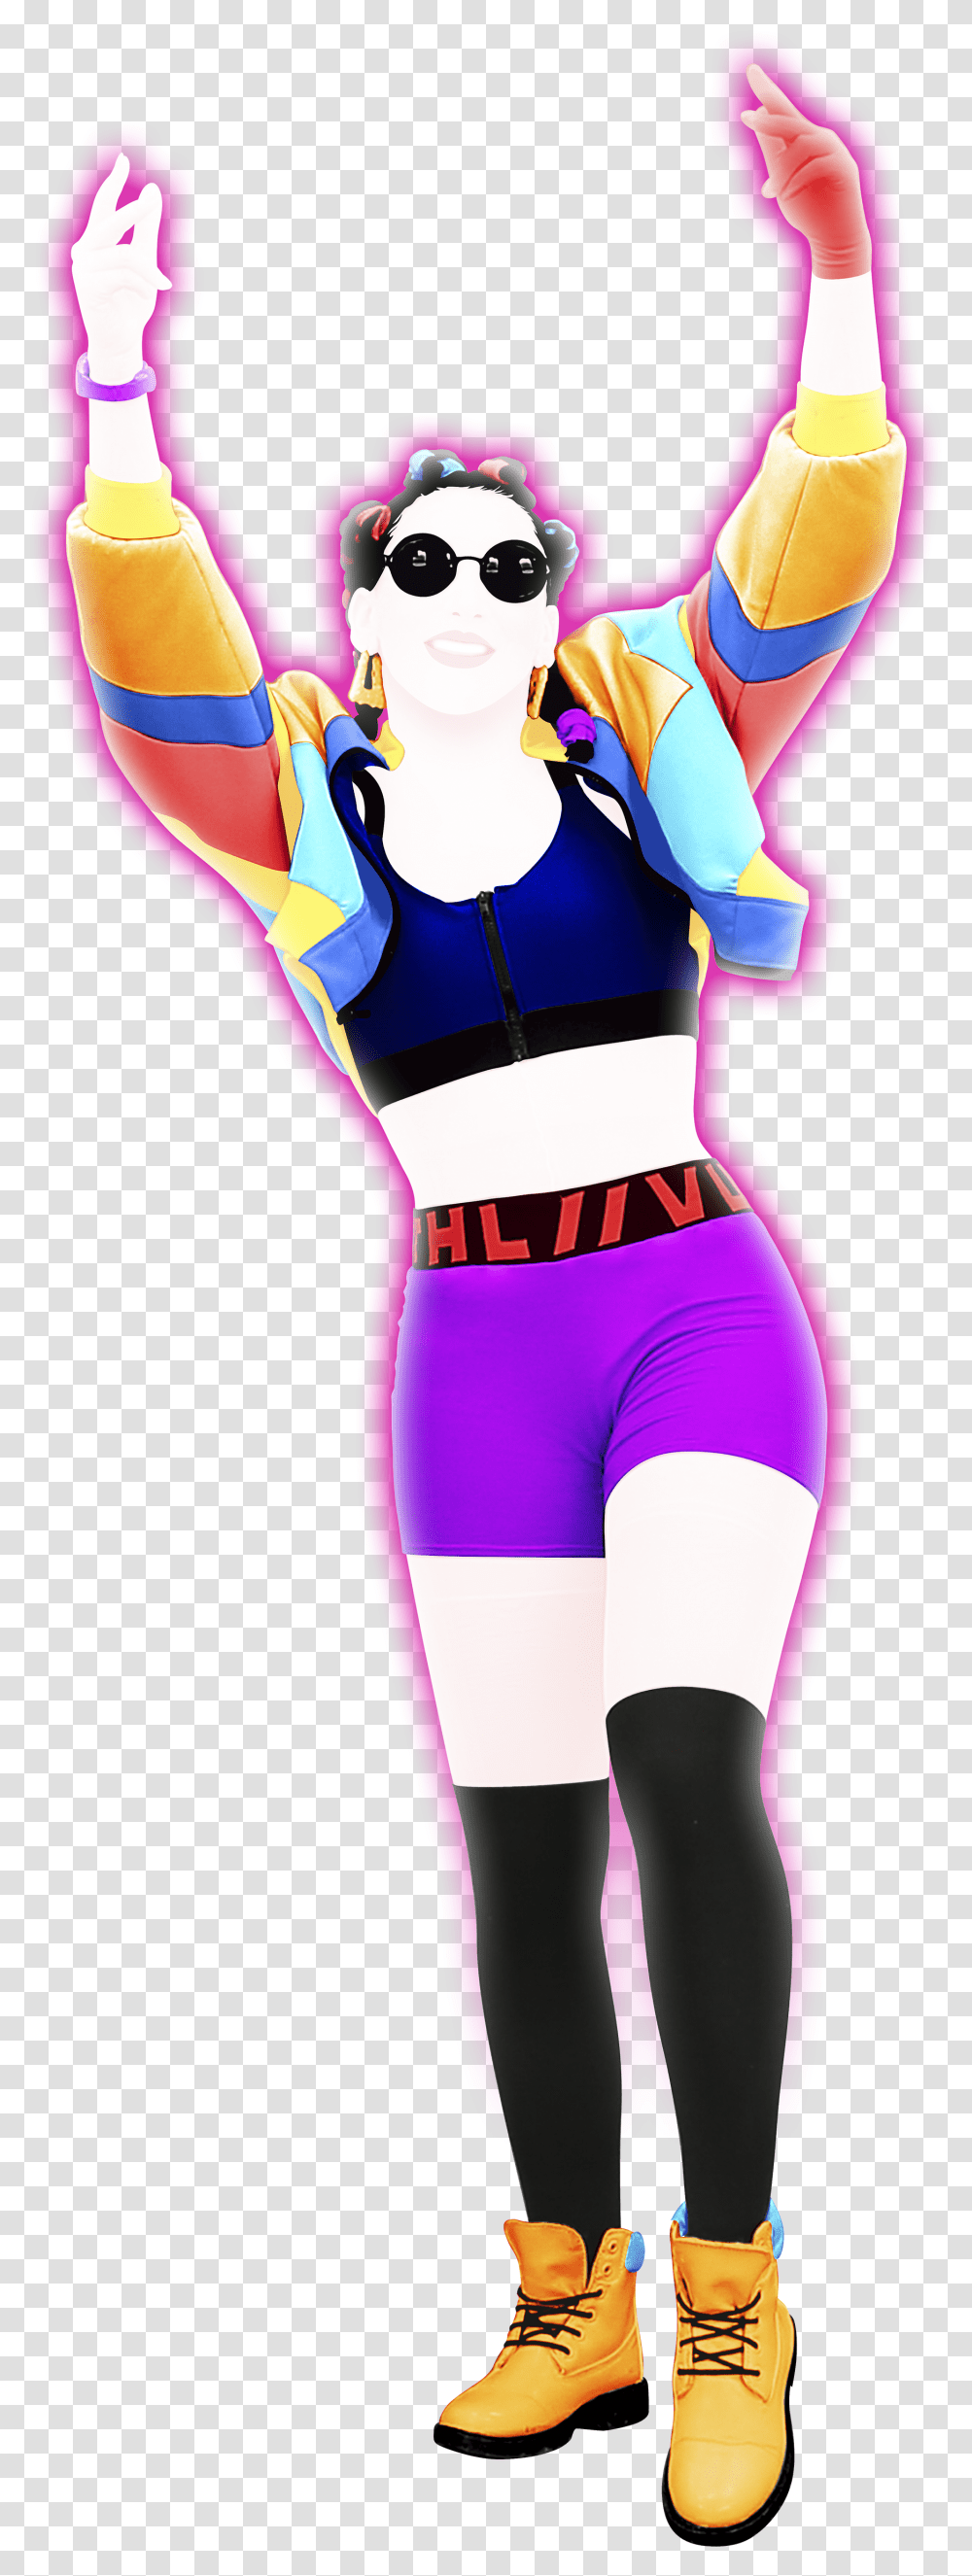 Just Dance 2019 Characters Transparent Png